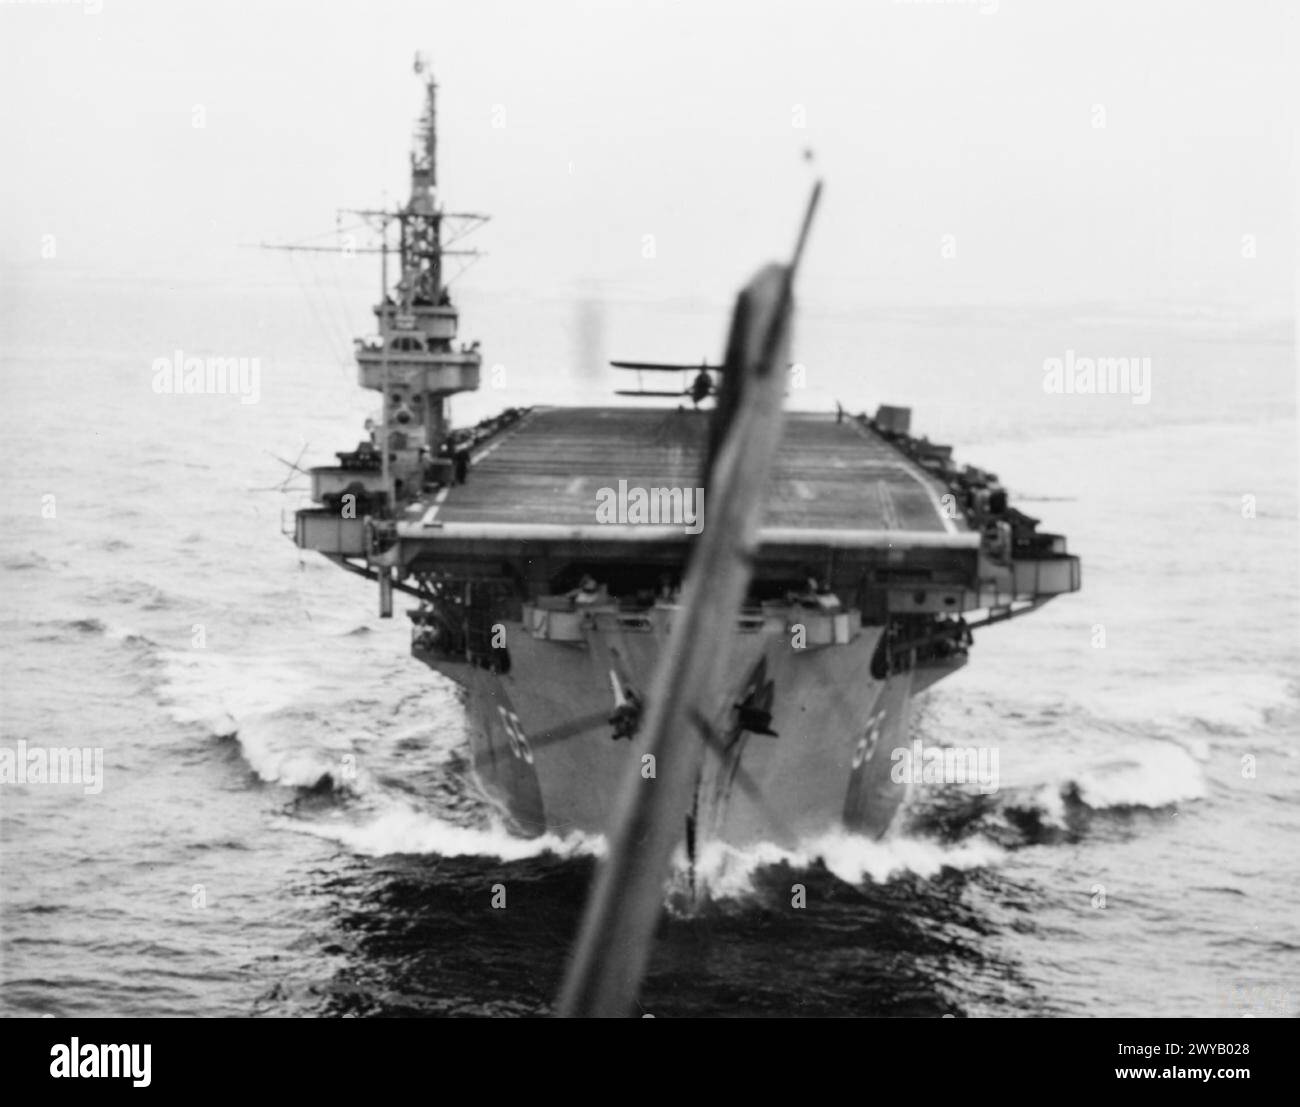 WITH THE ESCORT CARRIER HMS SMITER. 1944, AT SEA, ON BOARD A FAIREY SWORDFISH OF THE CARRIER DURING THE TRAINING OF DECK LANDING CONTROL OFFICERS, WHEN AIRCRAFT WERE TAKING OFF AND LANDING ON. - Looking back from a Fairey Swordfish as it took off from the SMITER. , Stock Photo